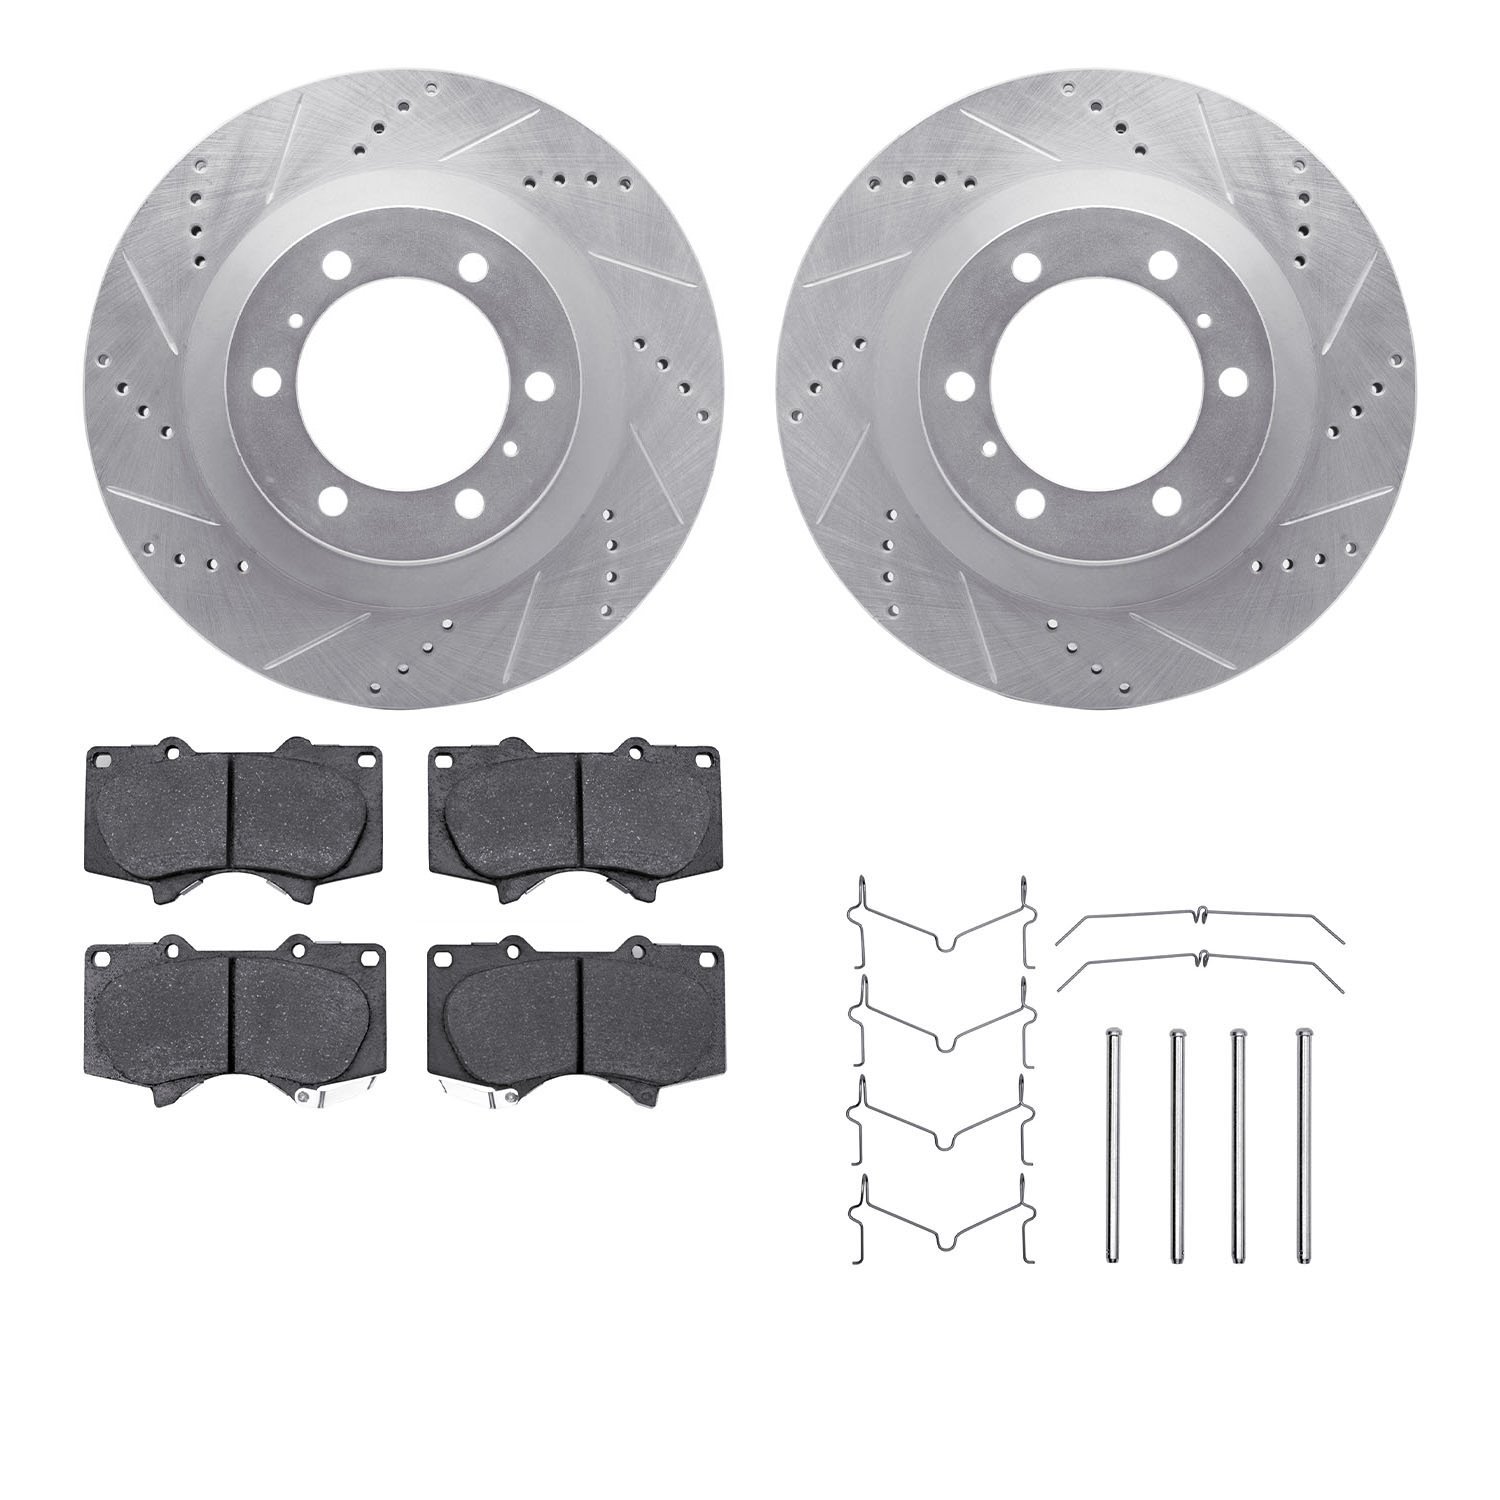 7312-76148 Drilled/Slotted Brake Rotor with 3000-Series Ceramic Brake Pads Kit & Hardware [Silver], Fits Select Lexus/Toyota/Sci